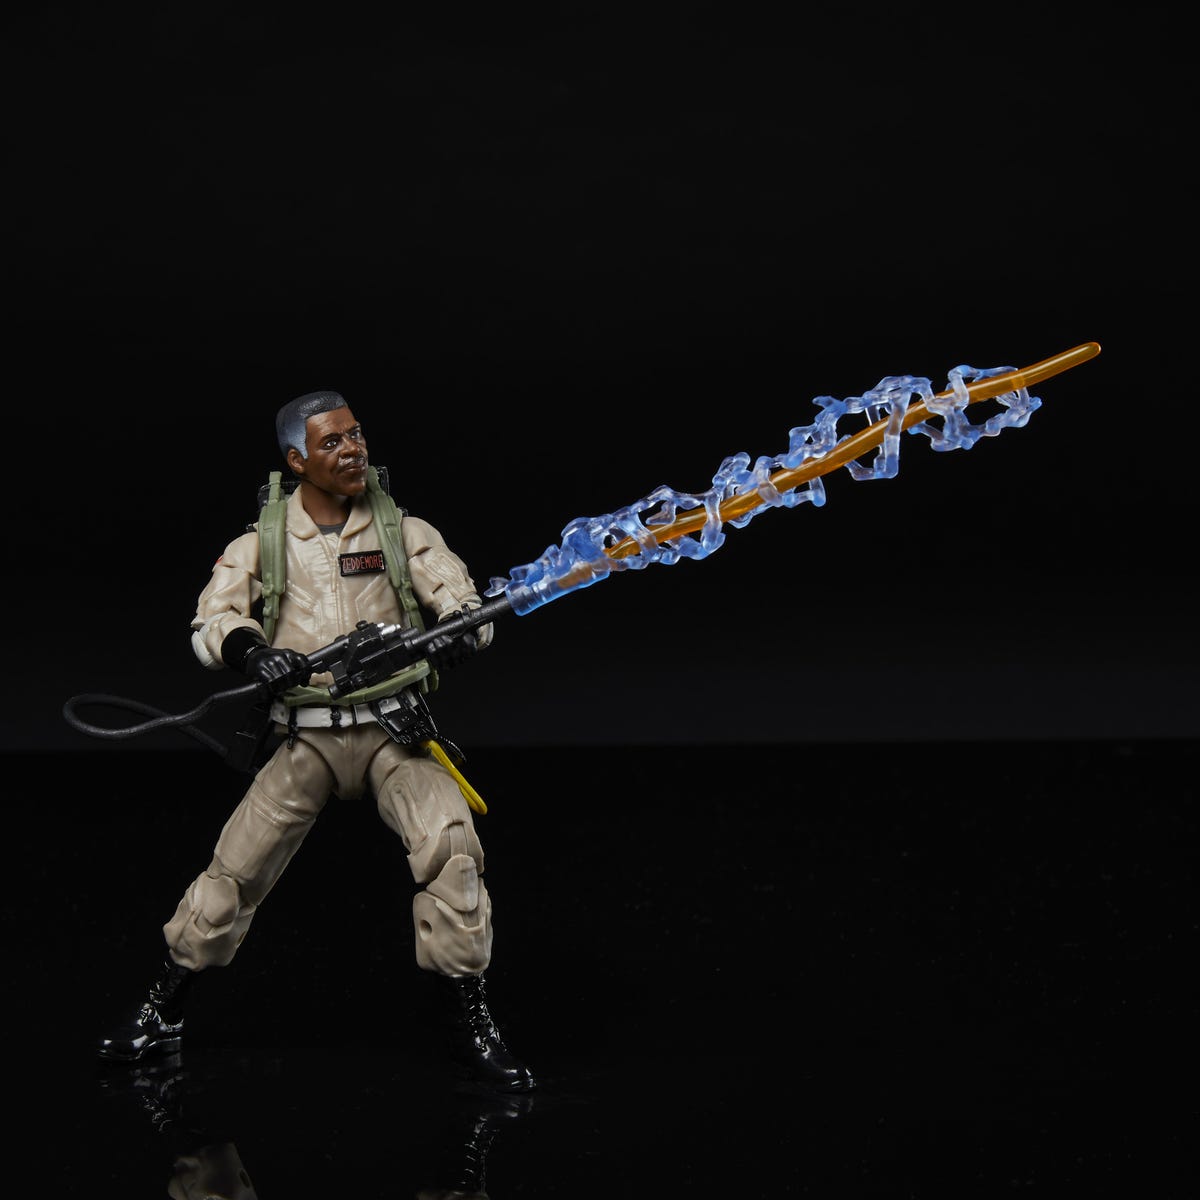 Ghostbusters action figures